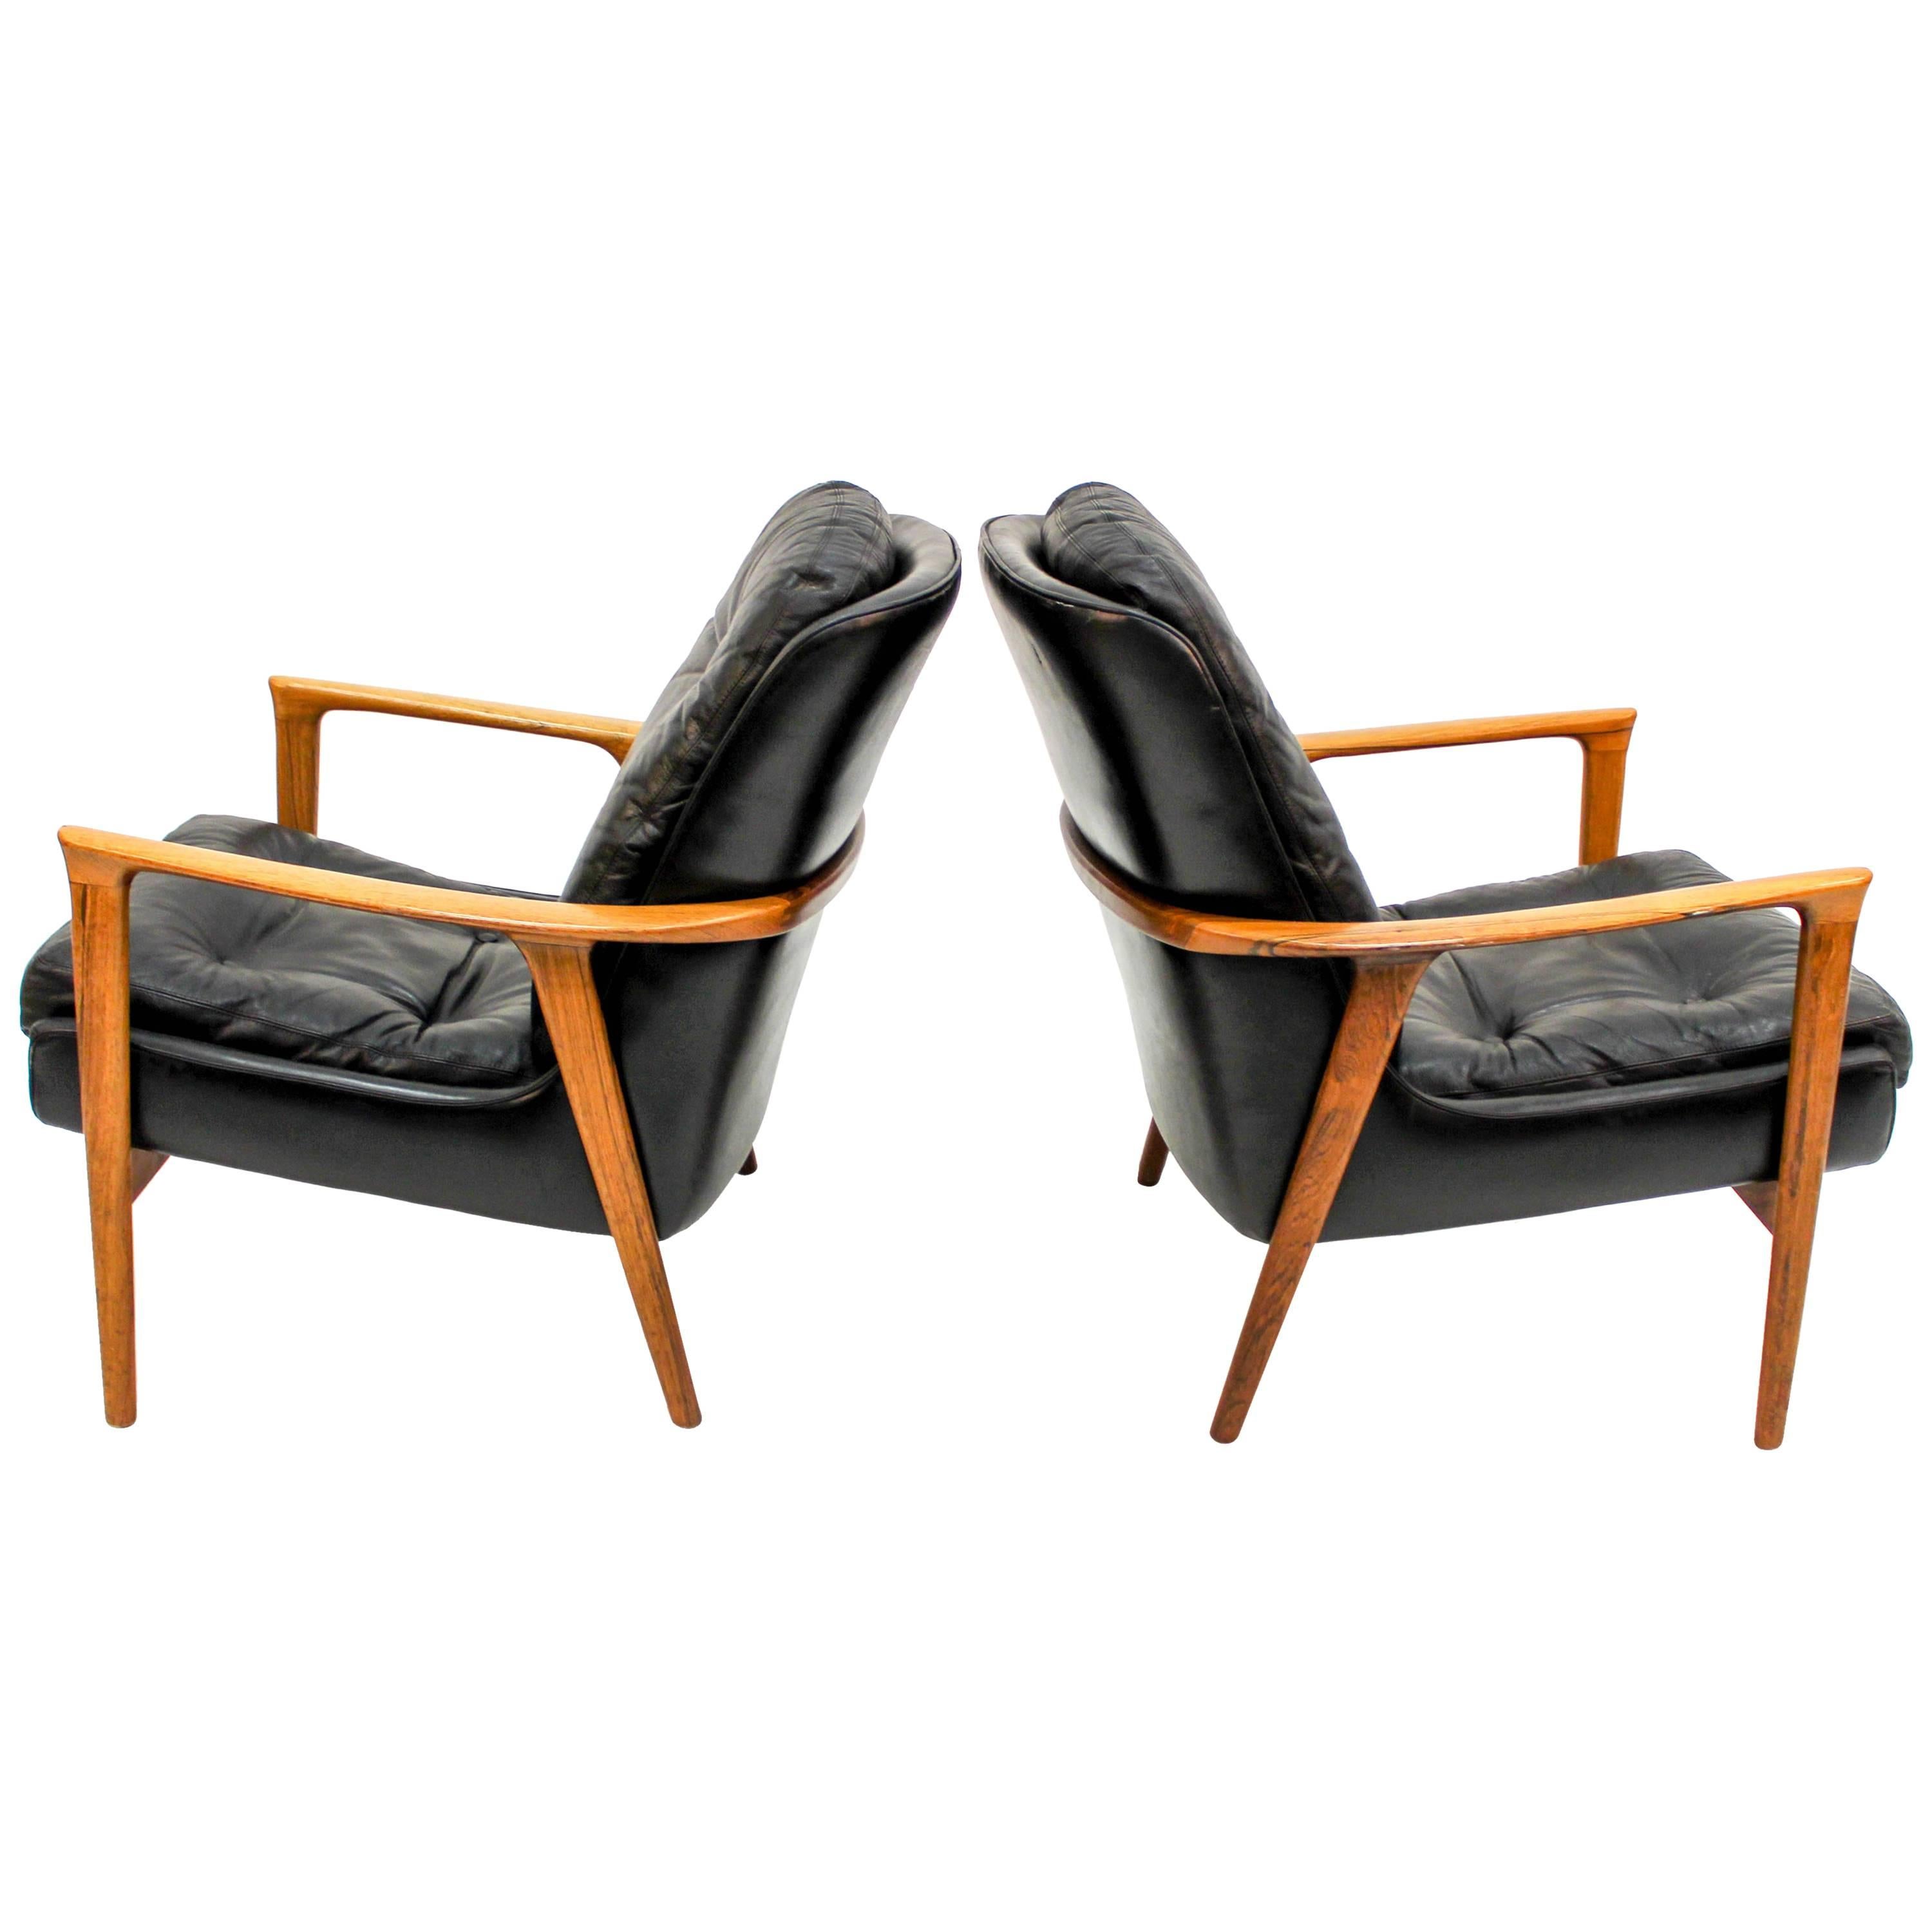 Midcentury Black Leather and Rosewood Lounge Chairs by Bröderna Andersson